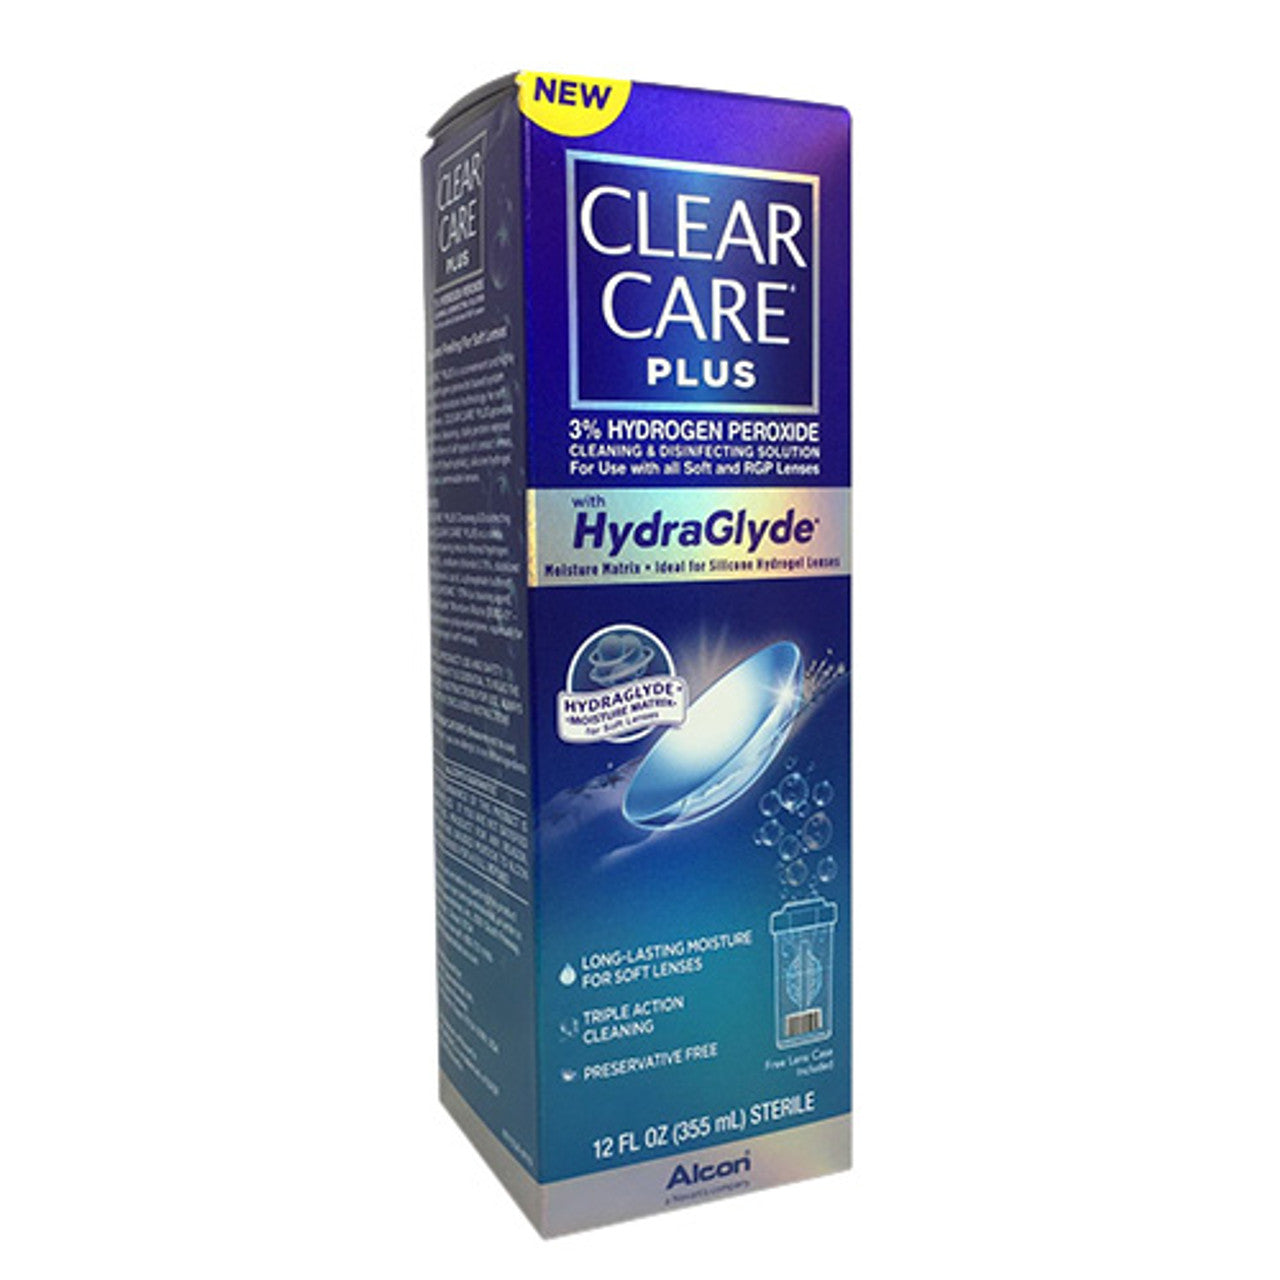 Clear Care Plus Cleaning and Disinfecting Solution with HydraGlyde - 12 oz